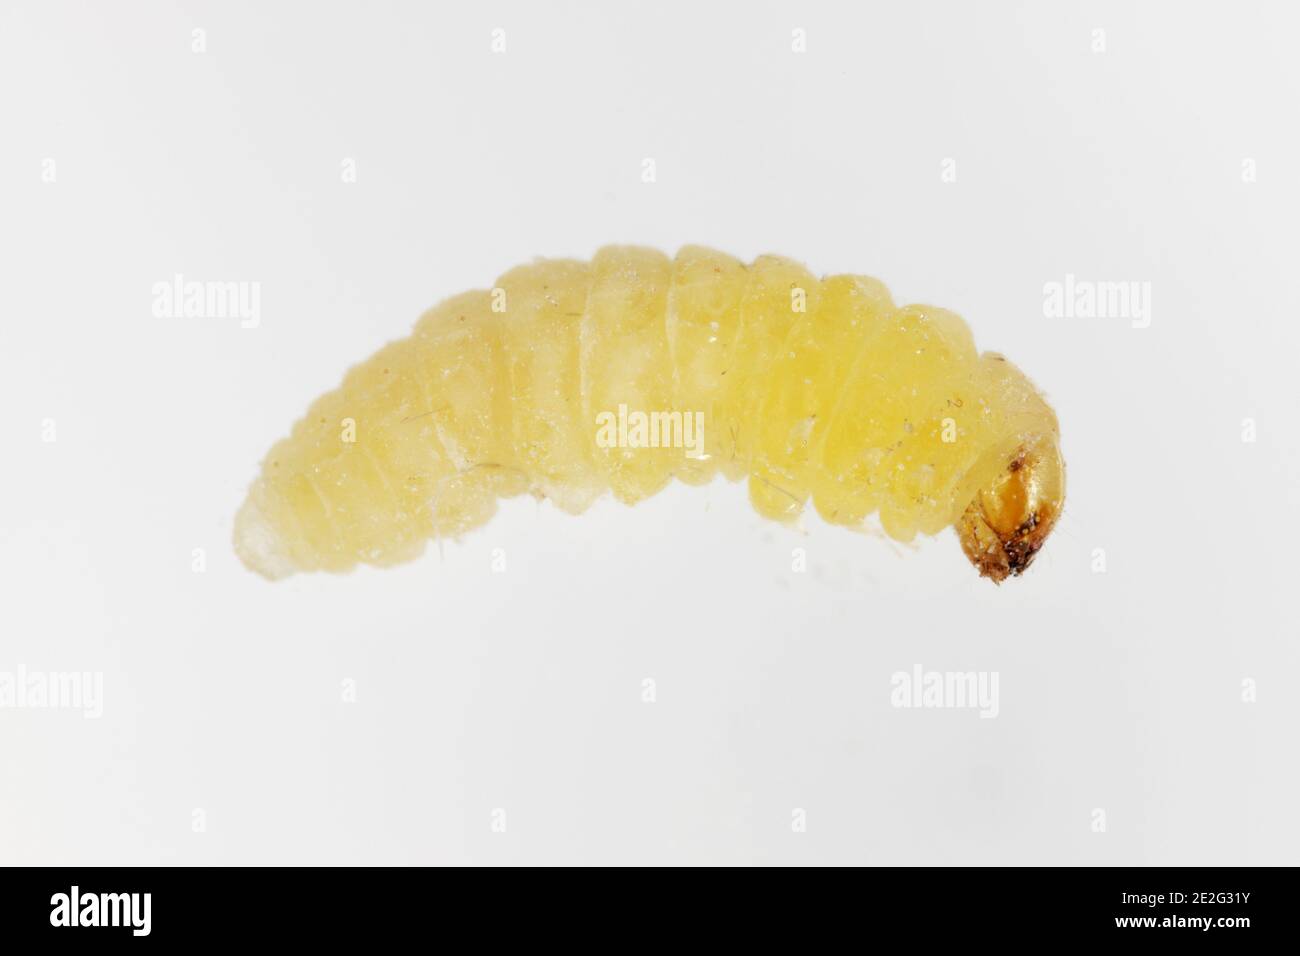 Caterrpillar of the Angoumois grain moth (Sitotroga cerealella). It is an important pest of stored grains of cereals, maize, rice and others Stock Photo